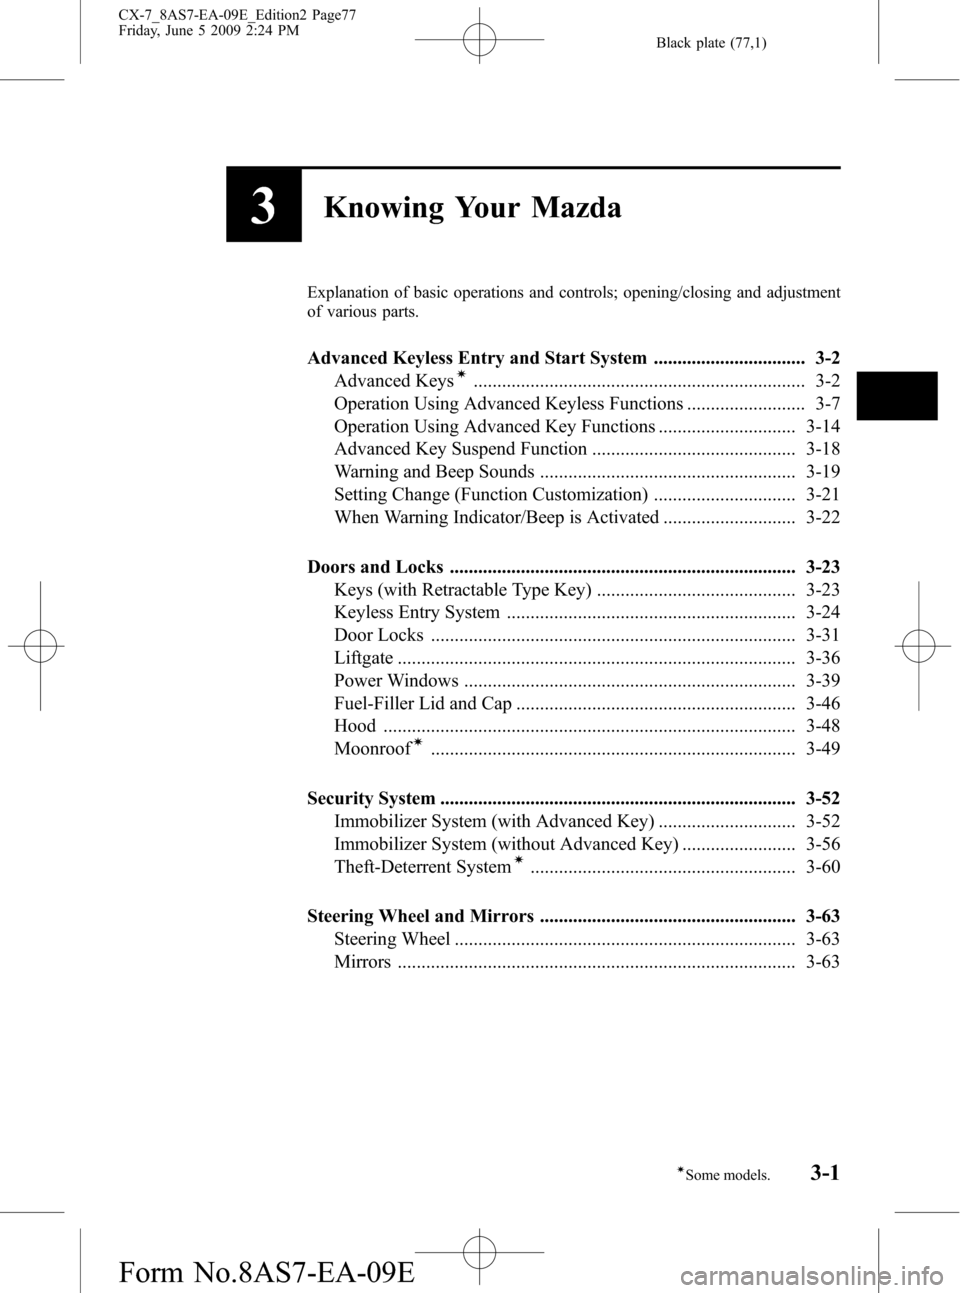 MAZDA MODEL CX-7 2010  Owners Manual (in English) Black plate (77,1)
3Knowing Your Mazda
Explanation of basic operations and controls; opening/closing and adjustment
of various parts.
Advanced Keyless Entry and Start System ..........................